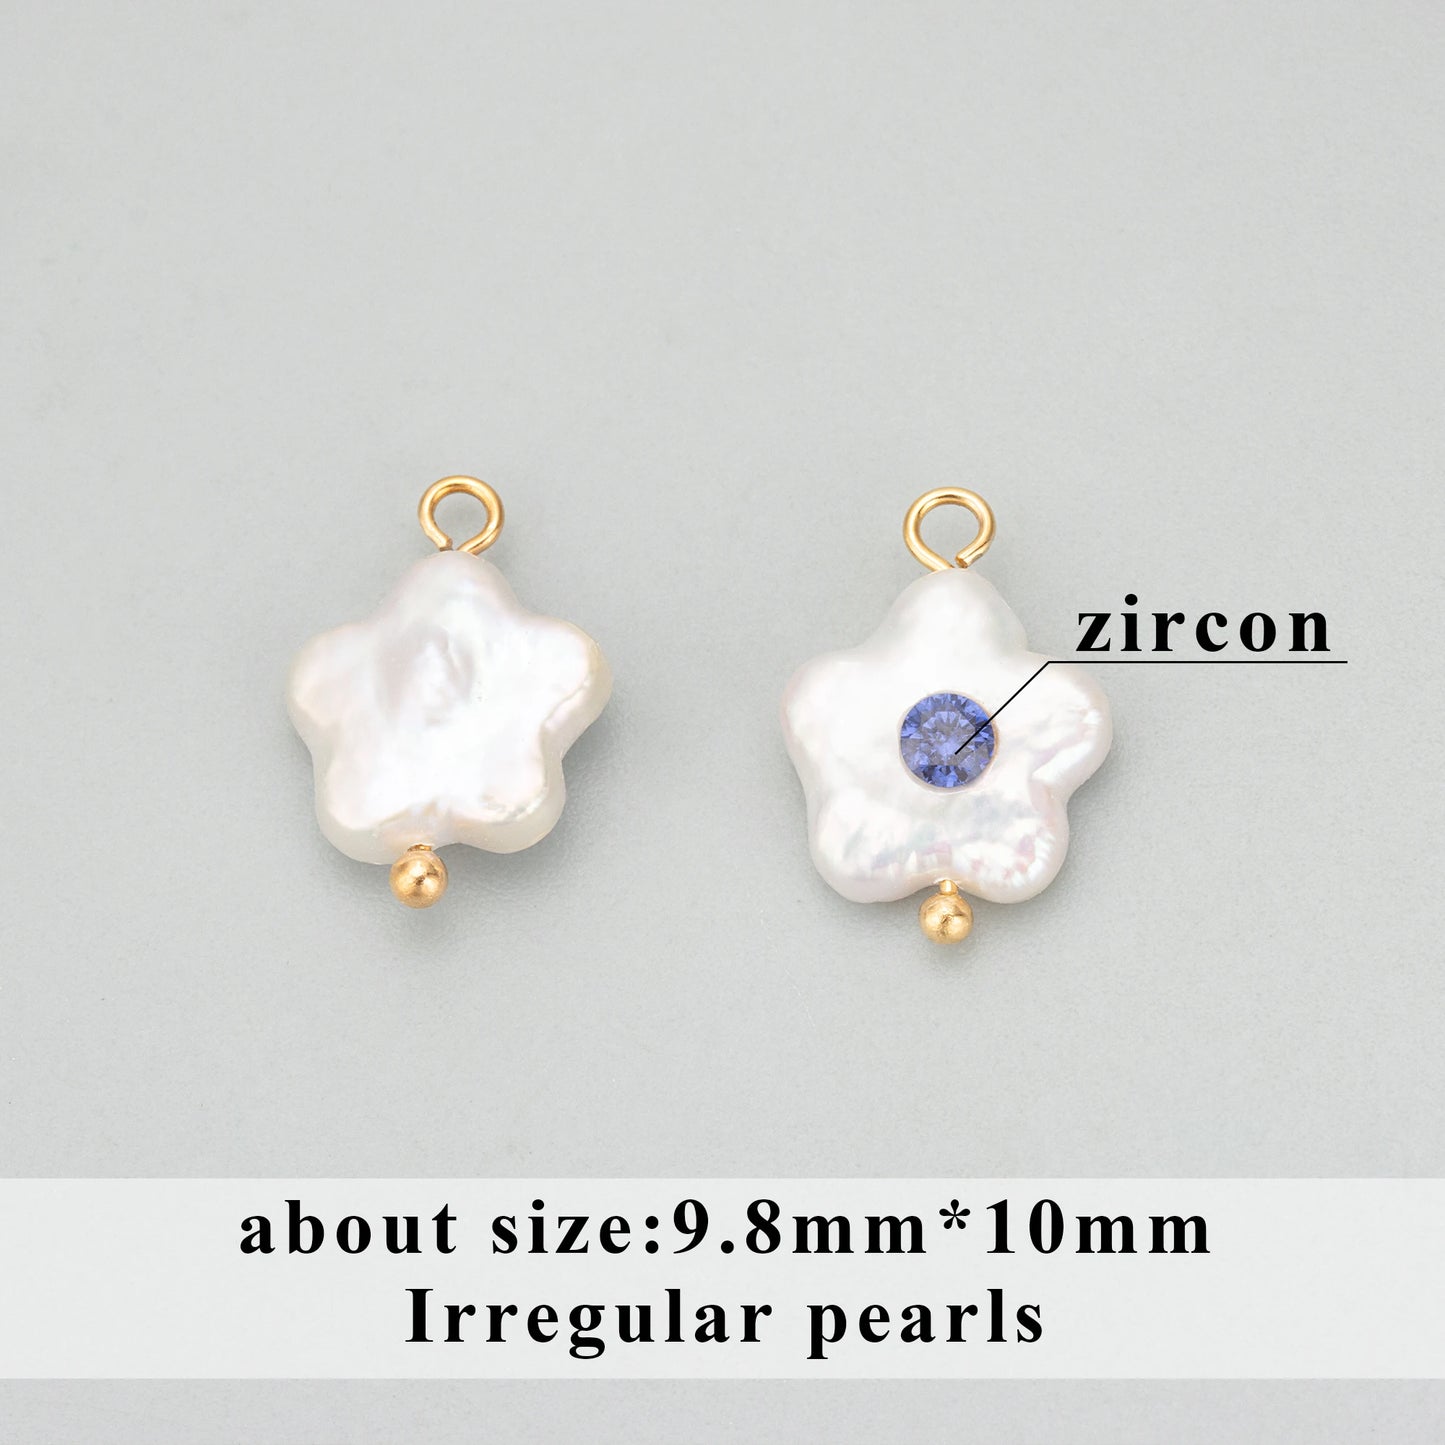 GUFEATHER ME03,jewelry accessories,natural pearl,copper,hand made,pearl with zircons,charms,diy pendants,jewelry making,2pcs/lot